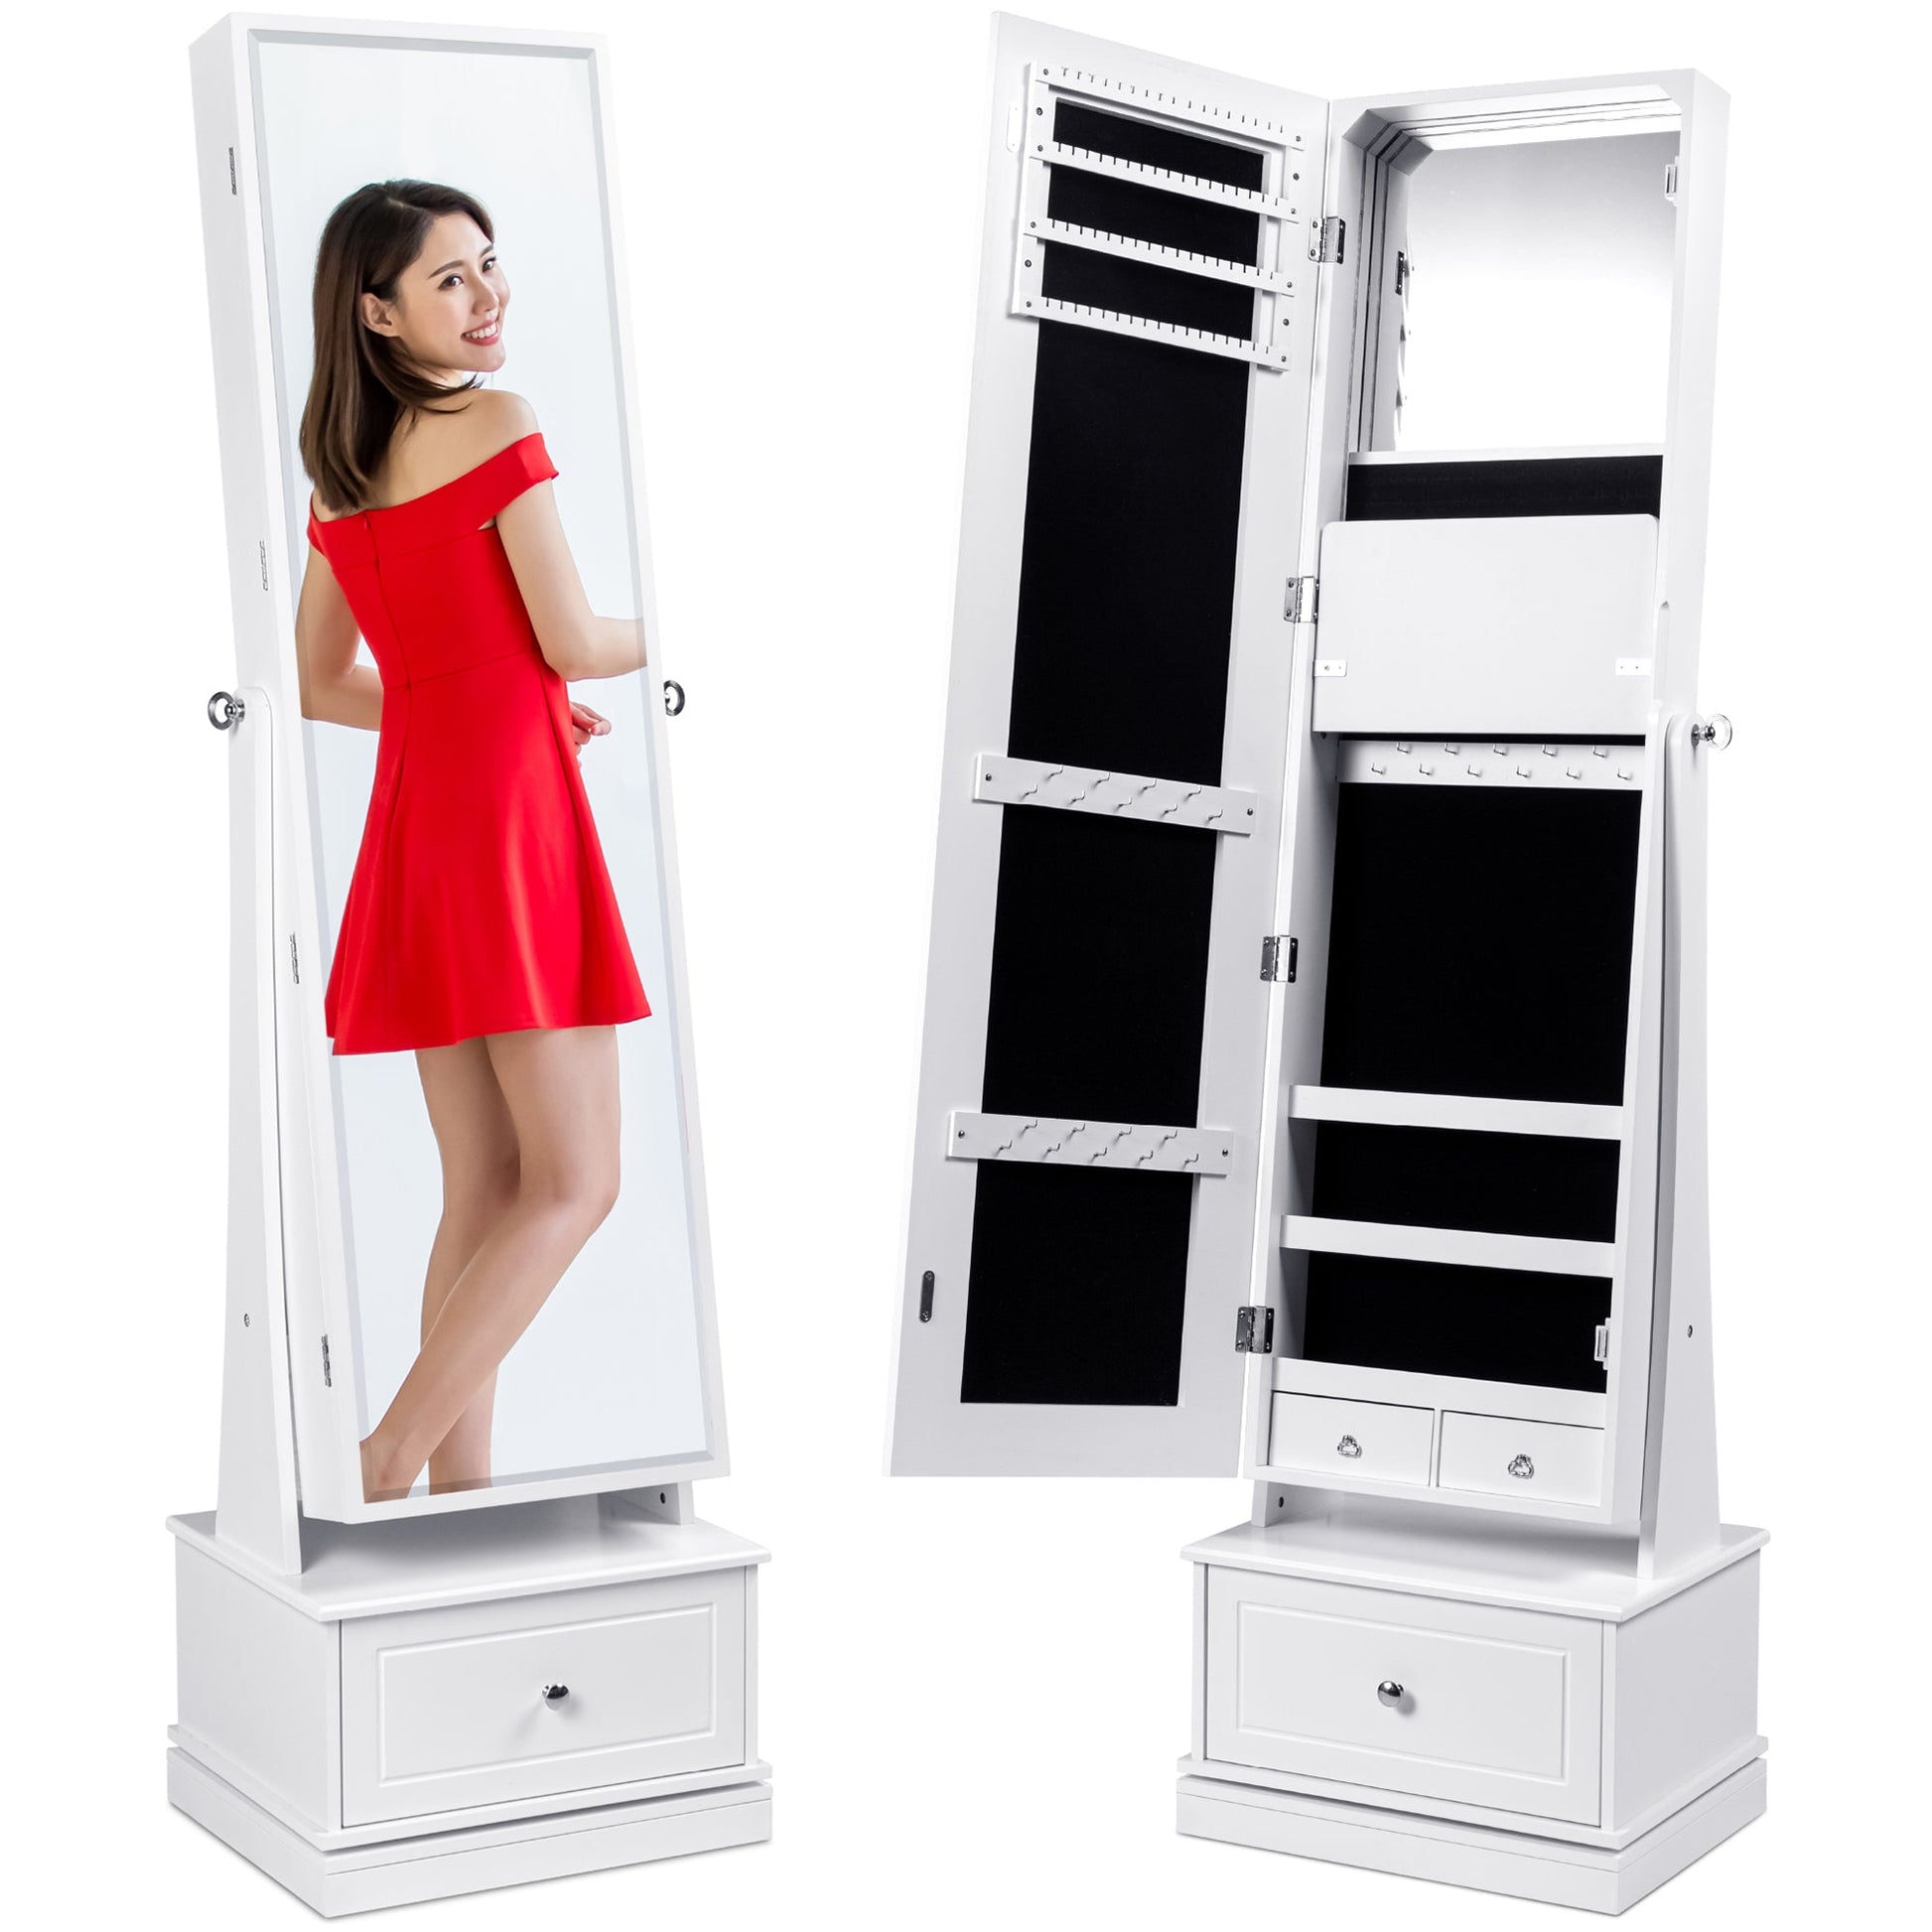 360 Swivel Mirrored Jewelry Cabinet Armoire w/ LED Lights, Mirror